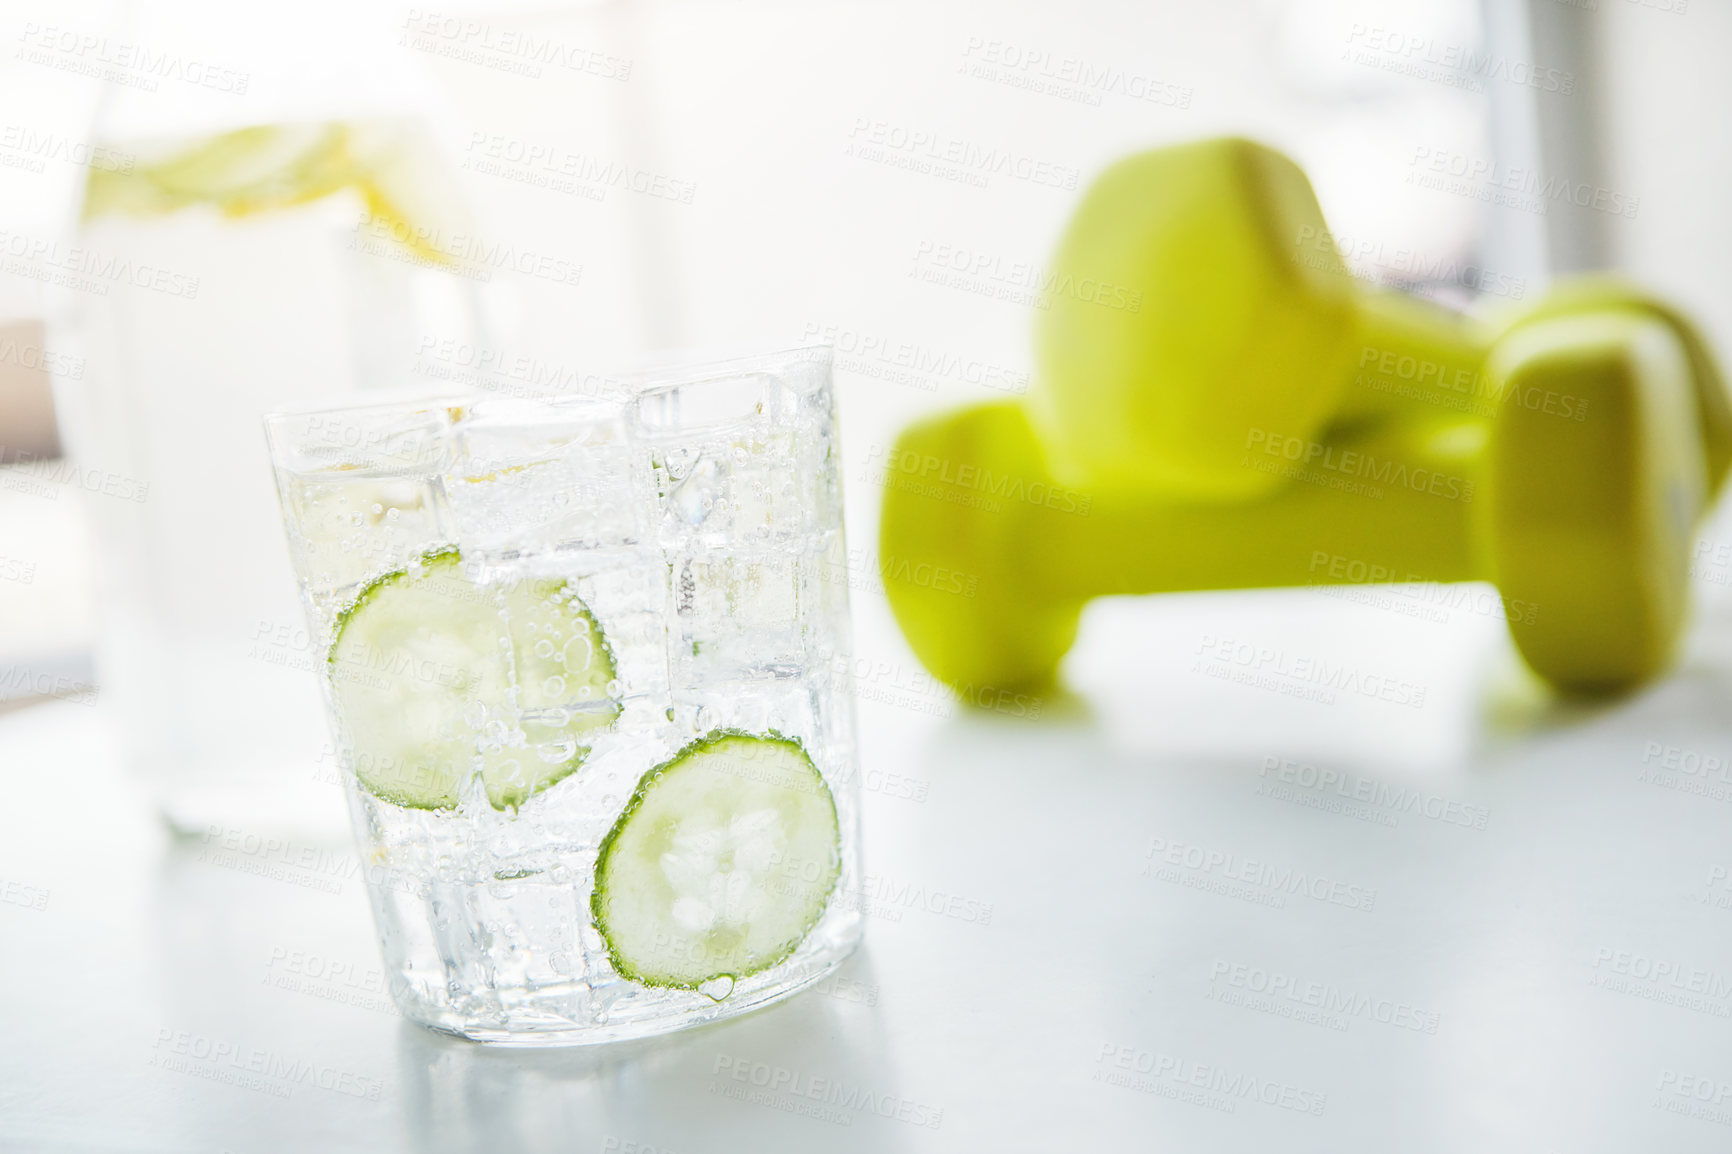 Buy stock photo Shot of a glass of water and dumbbells on a table